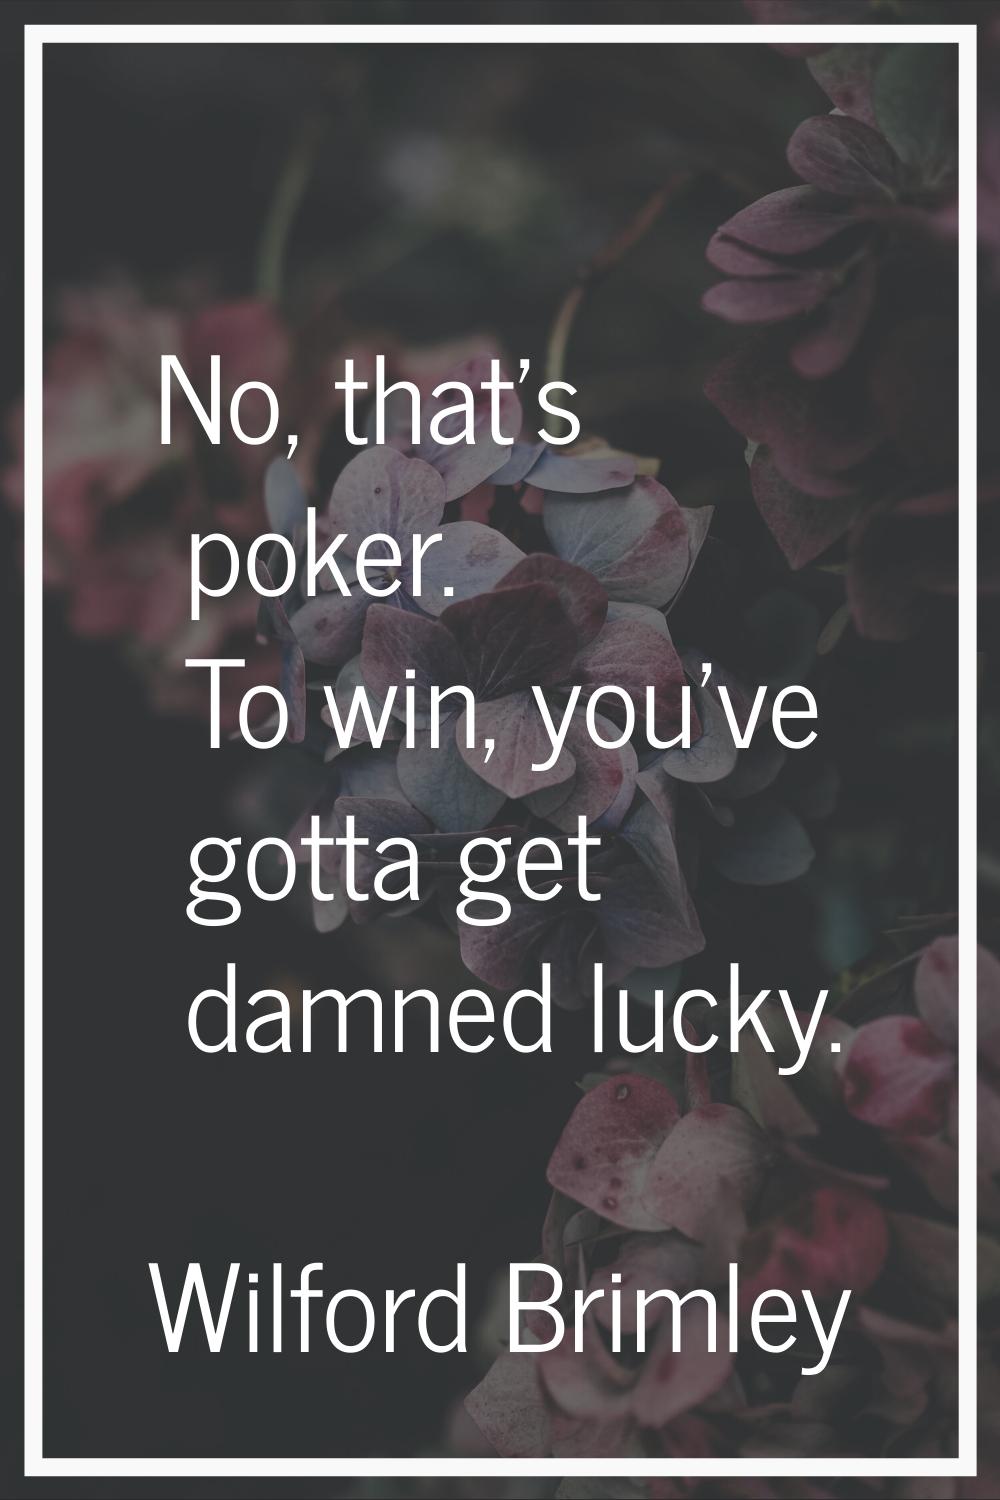 No, that's poker. To win, you've gotta get damned lucky.